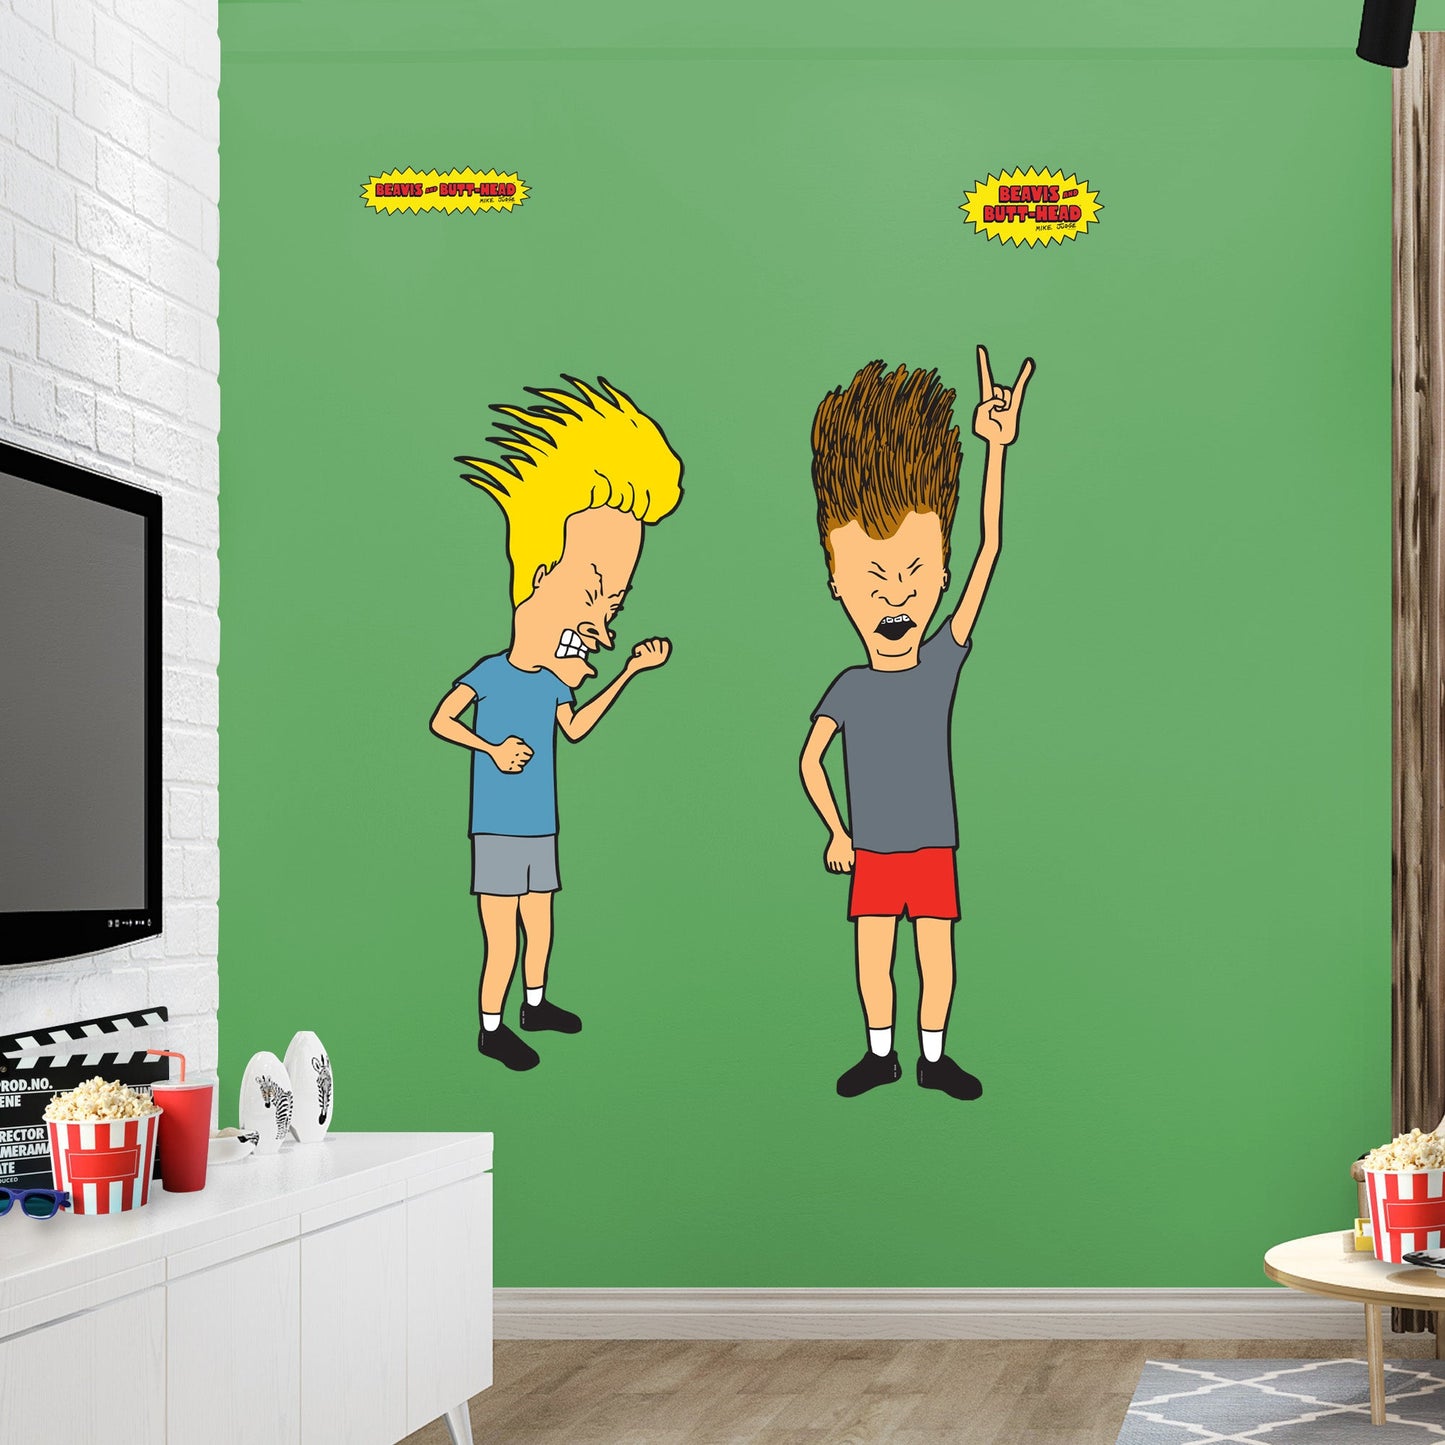 Beavis & Butt-Head: Beavis & Butt-Head RealBig - Officially Licensed Paramount Removable Adhesive Decal